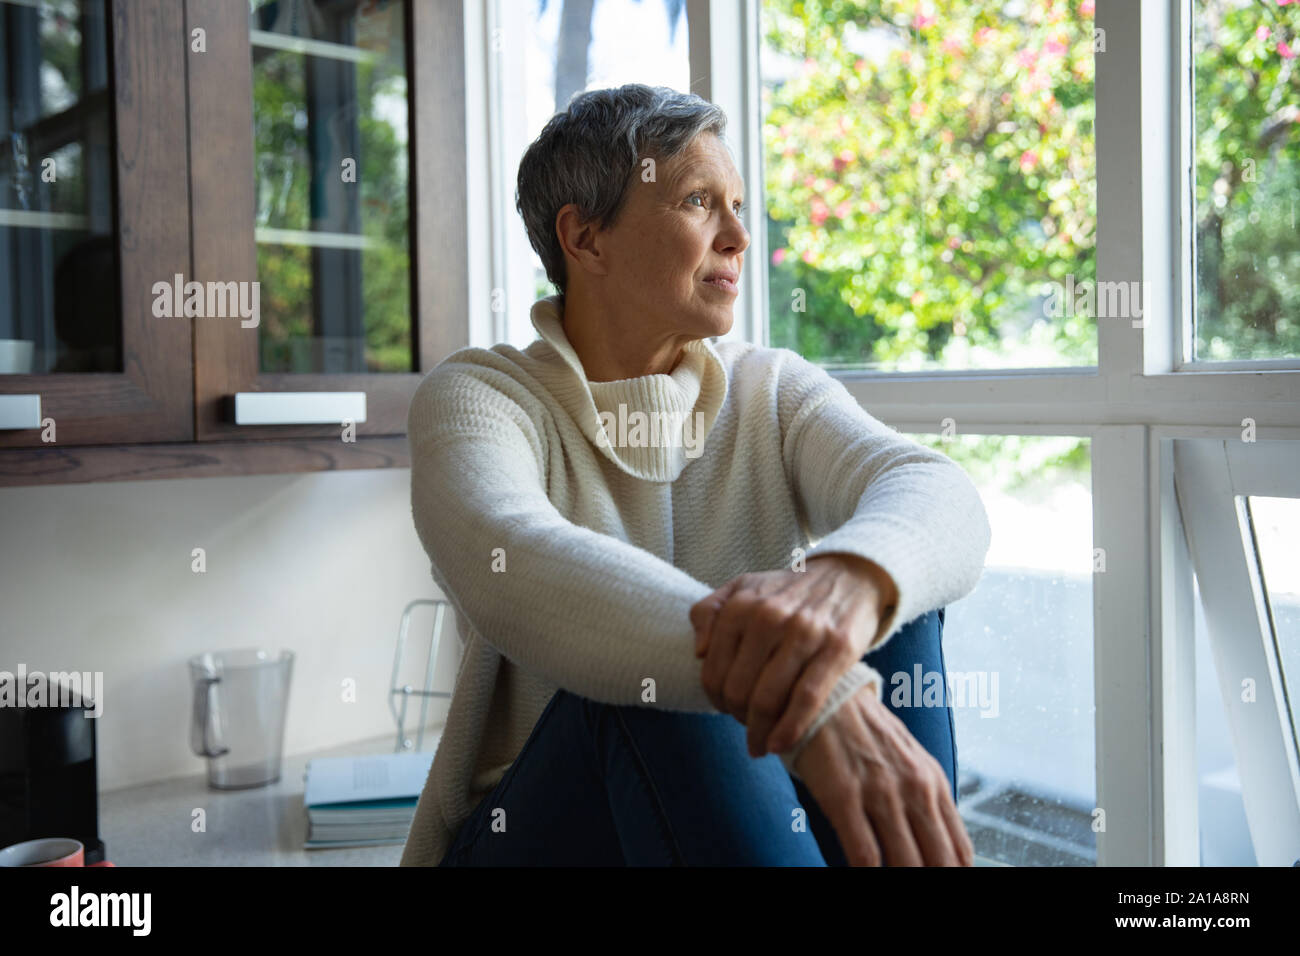 Mature woman alone at home Stock Photo